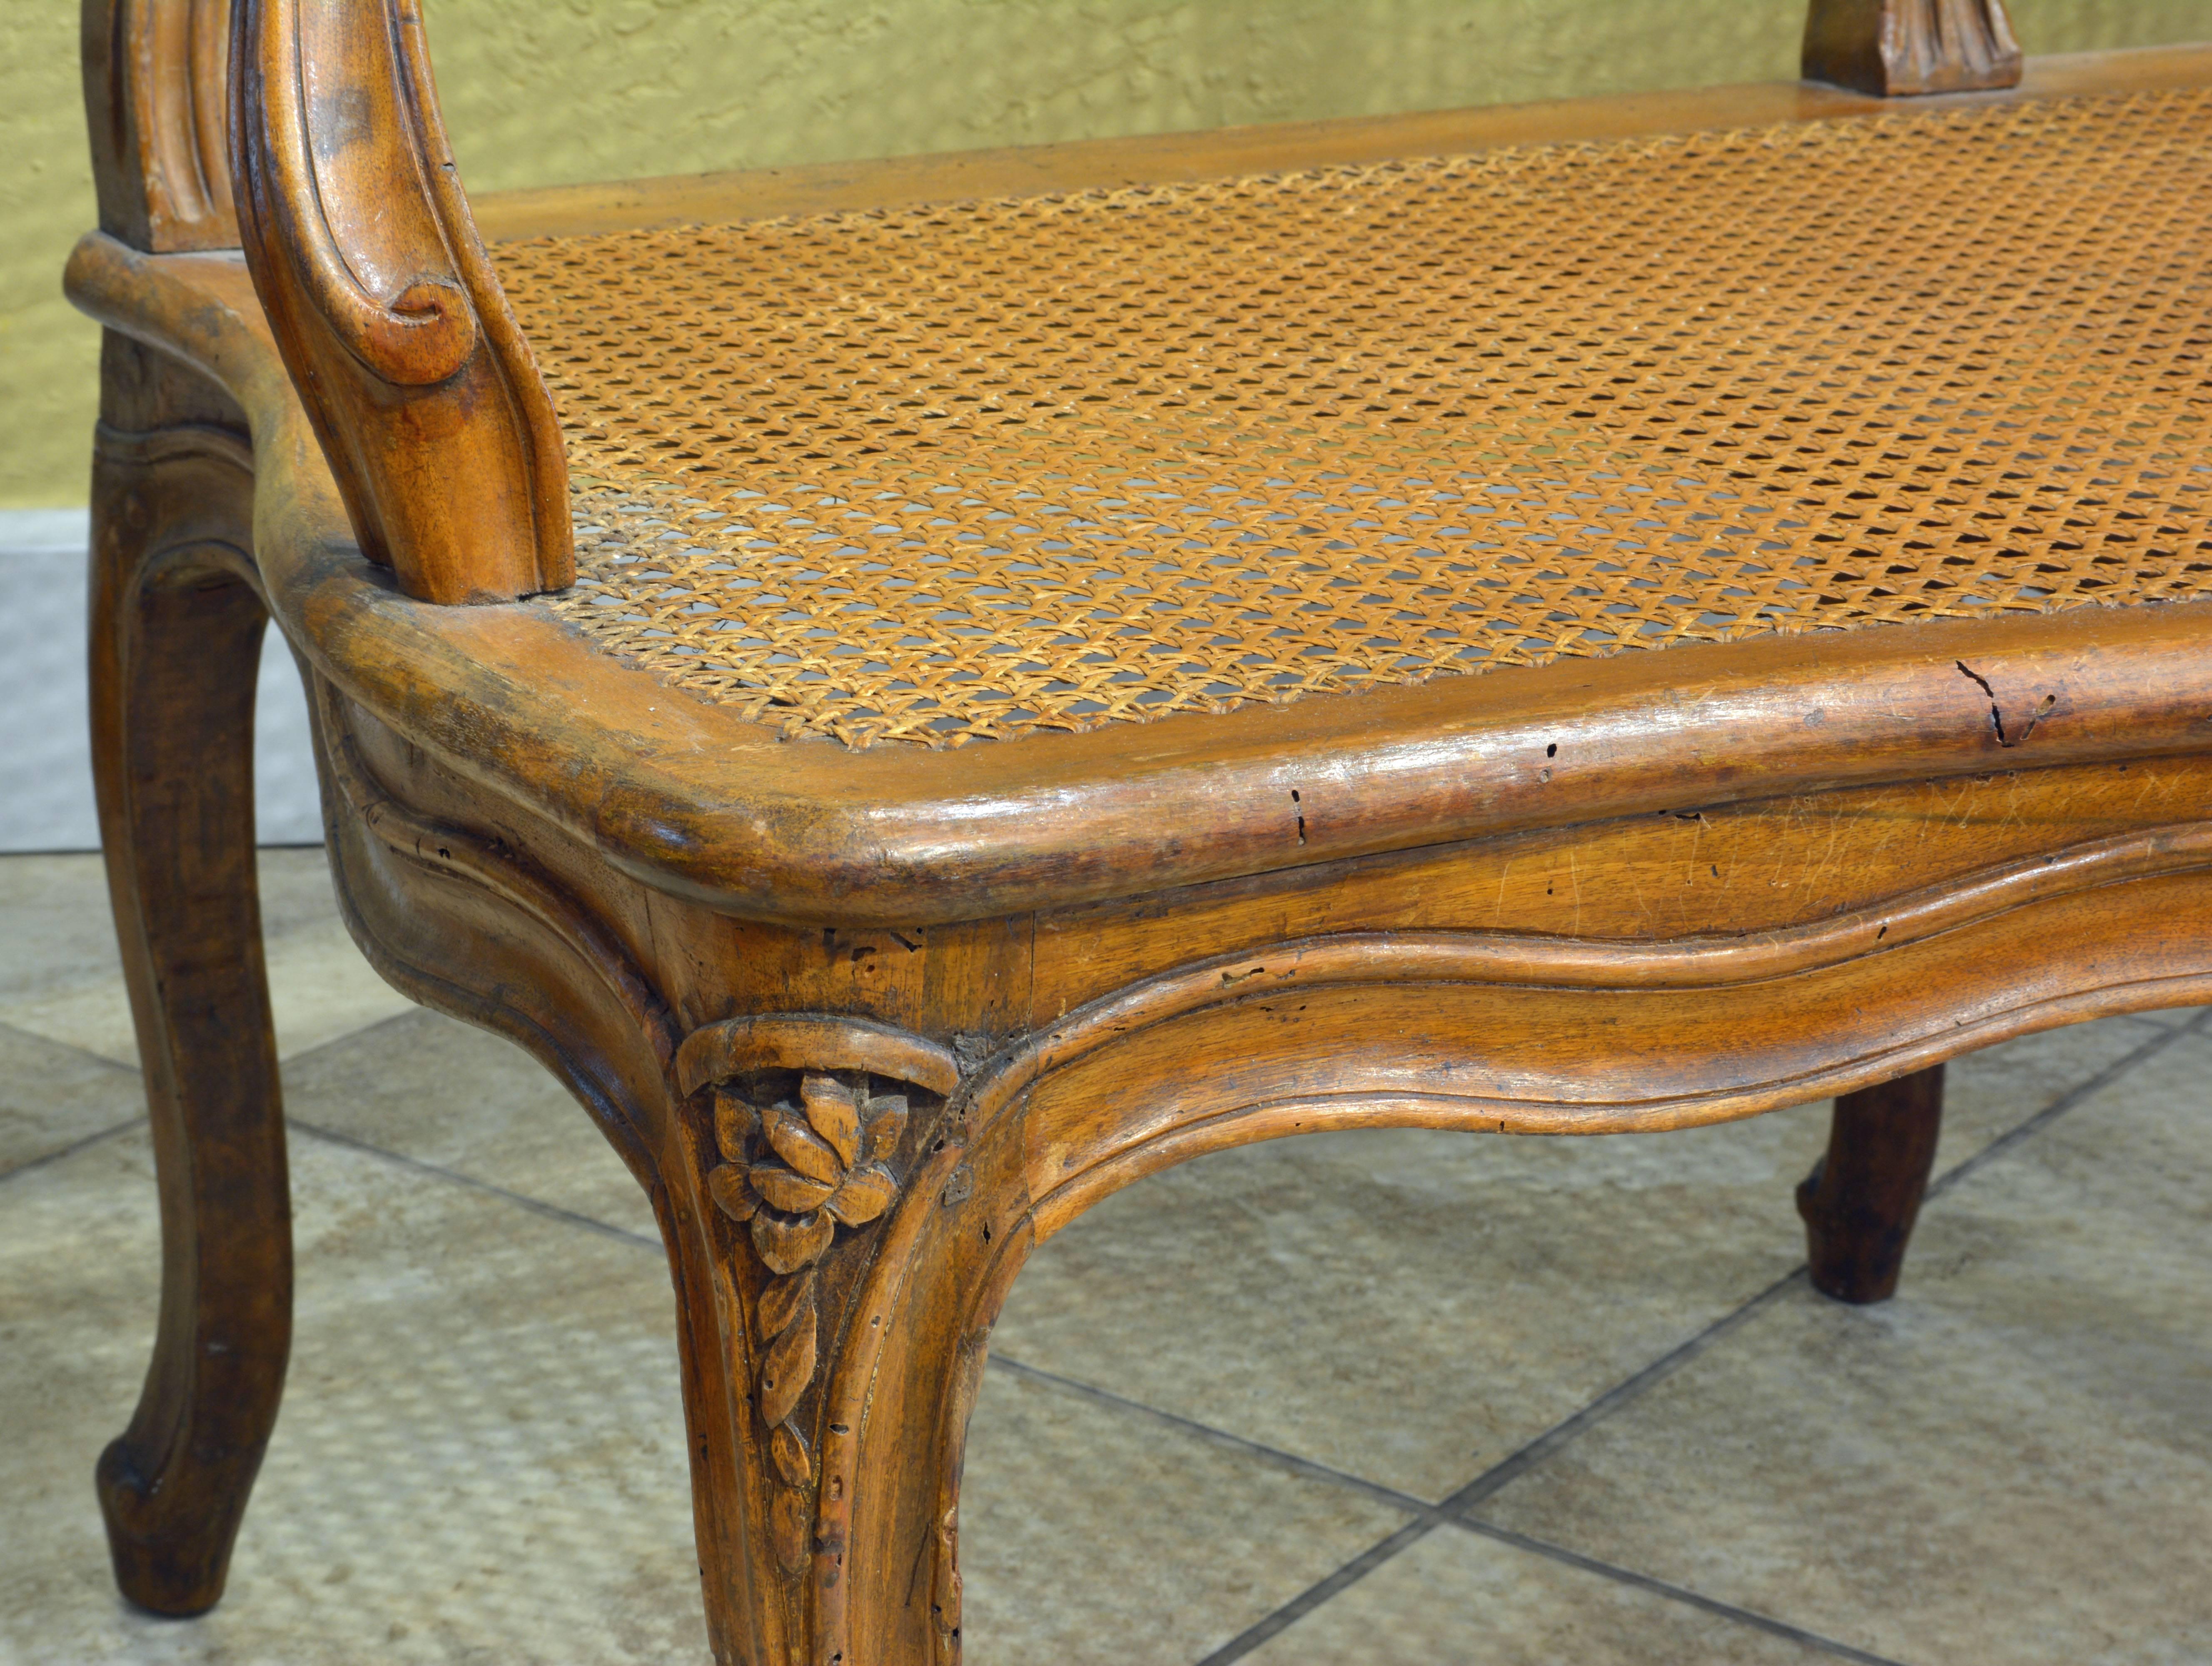 French Provincial Late 18th Century Provincial Louis XV Style Carved and Caned Walnut Settee